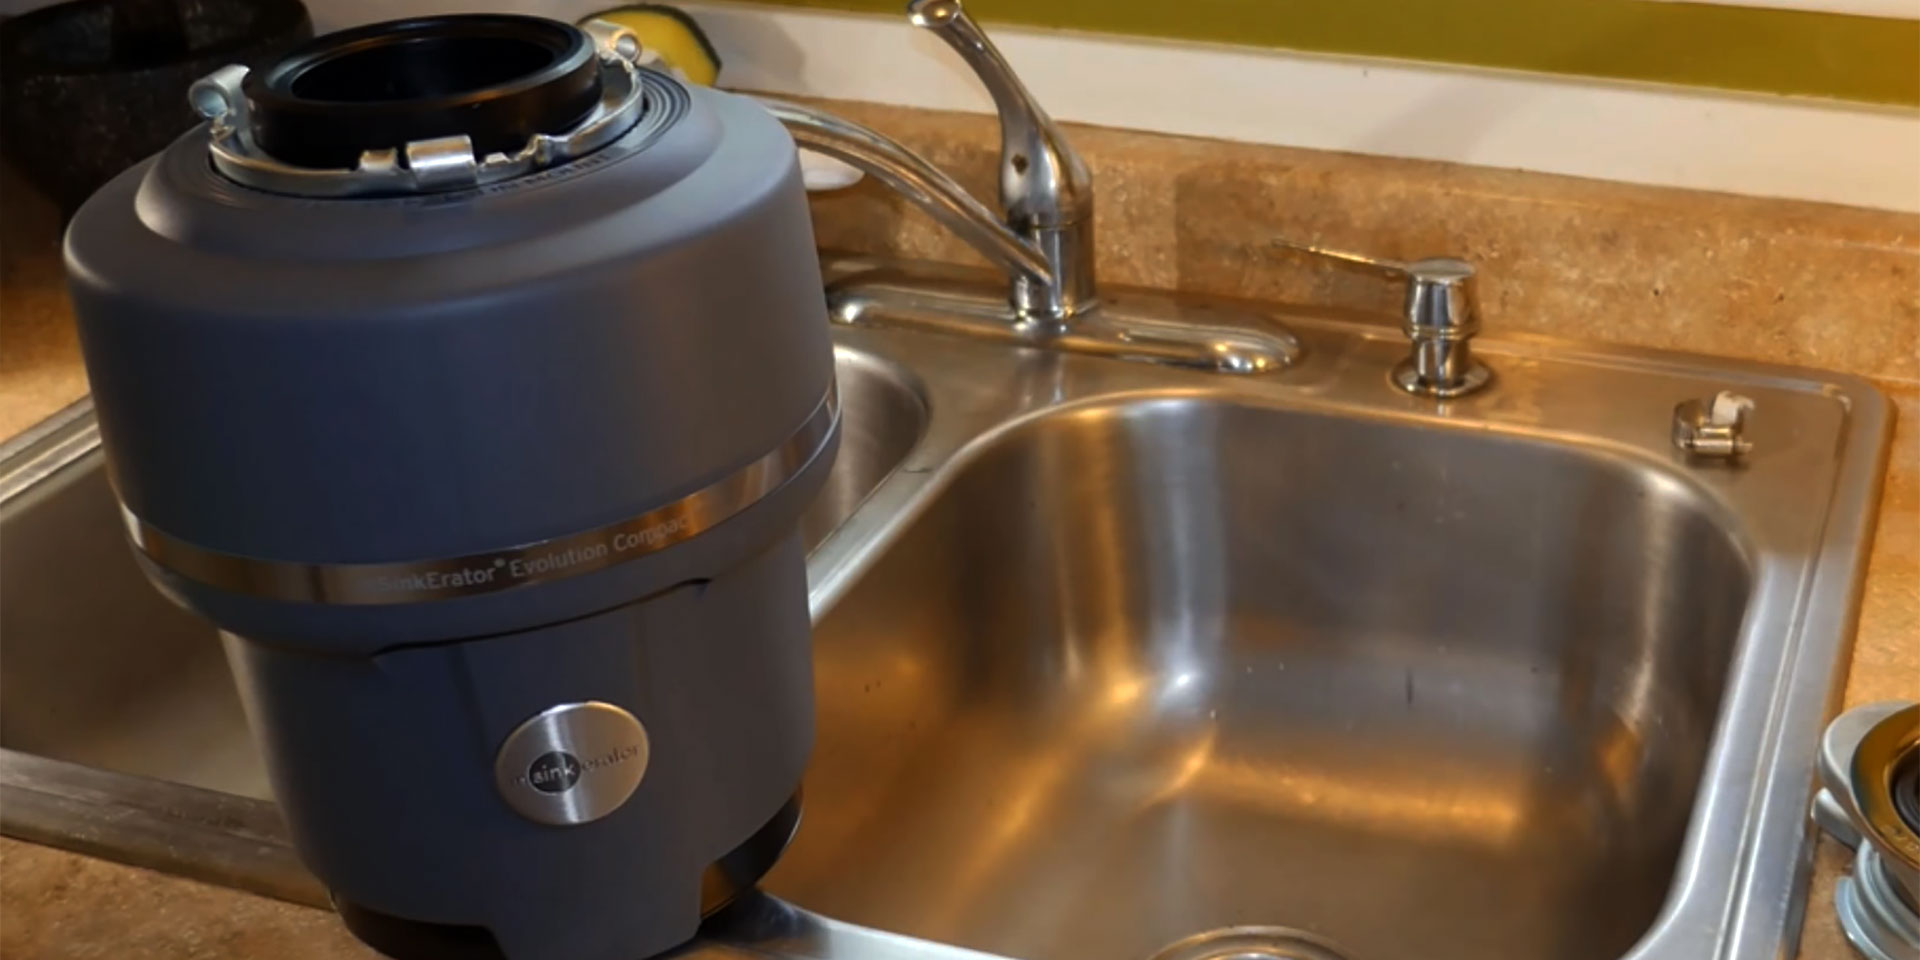 Best Garbage Disposals for Septic System